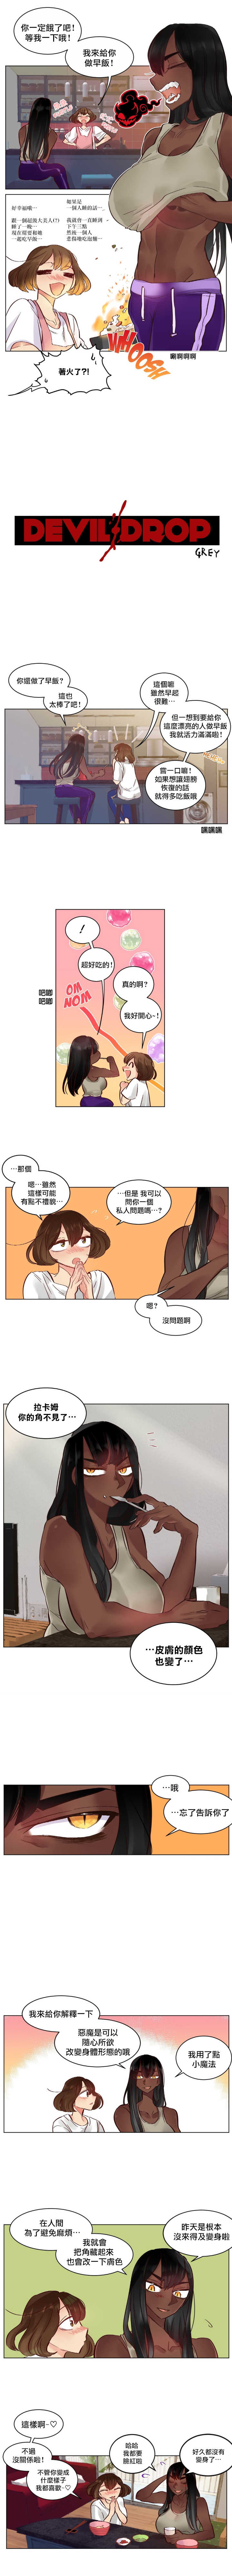 [Nanao Grey] Devil Drop | 天降惡魔 [Chinese] [沒有漢化] [Ongoing] - Page 16